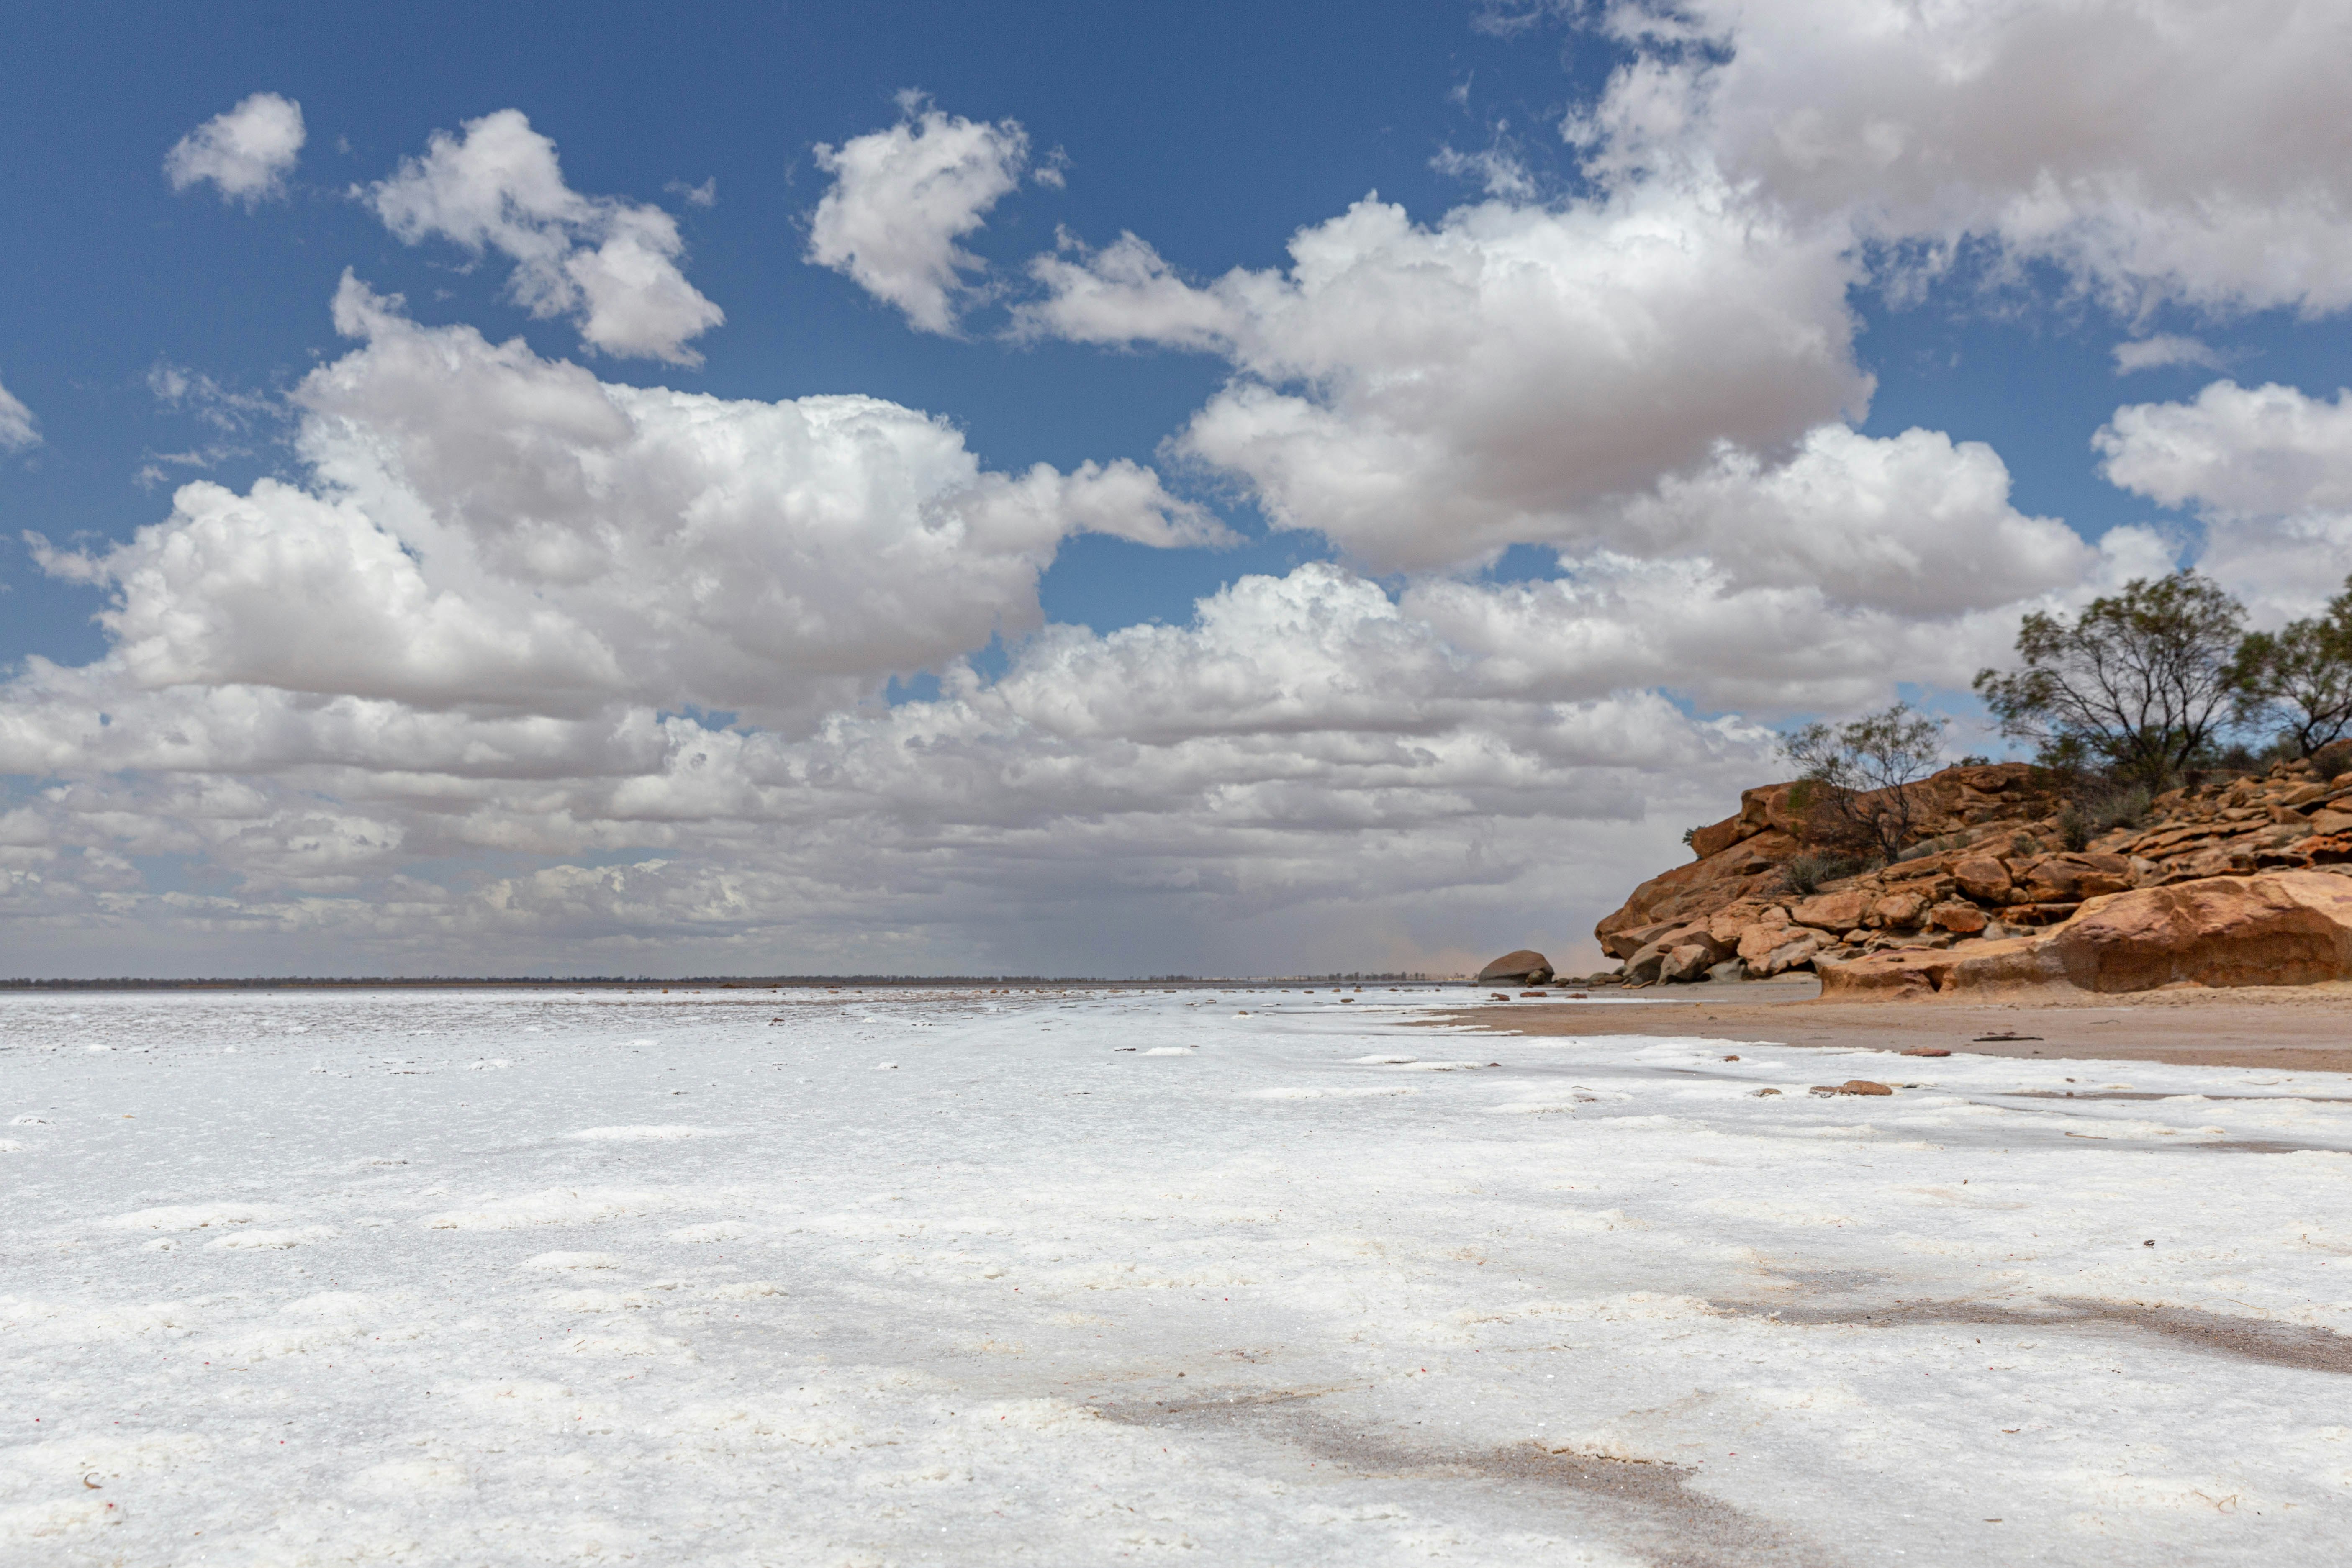 Granite outcrops and salt lakes are a feature of the landscape in the wheatbelt.